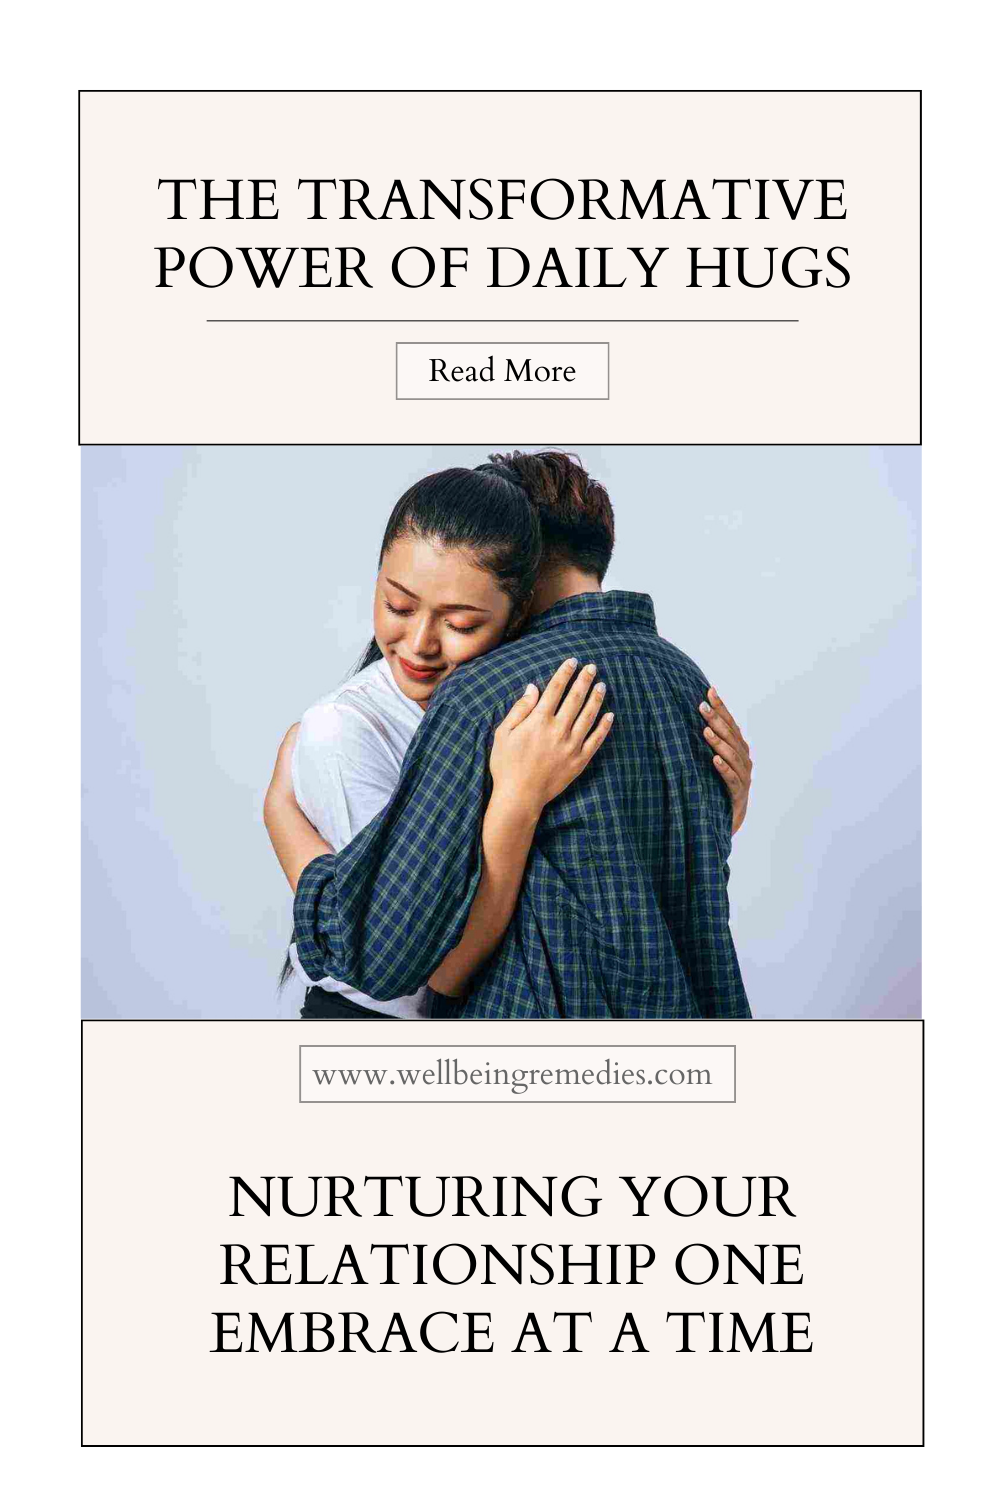 The Transformative Power of Daily Hugs